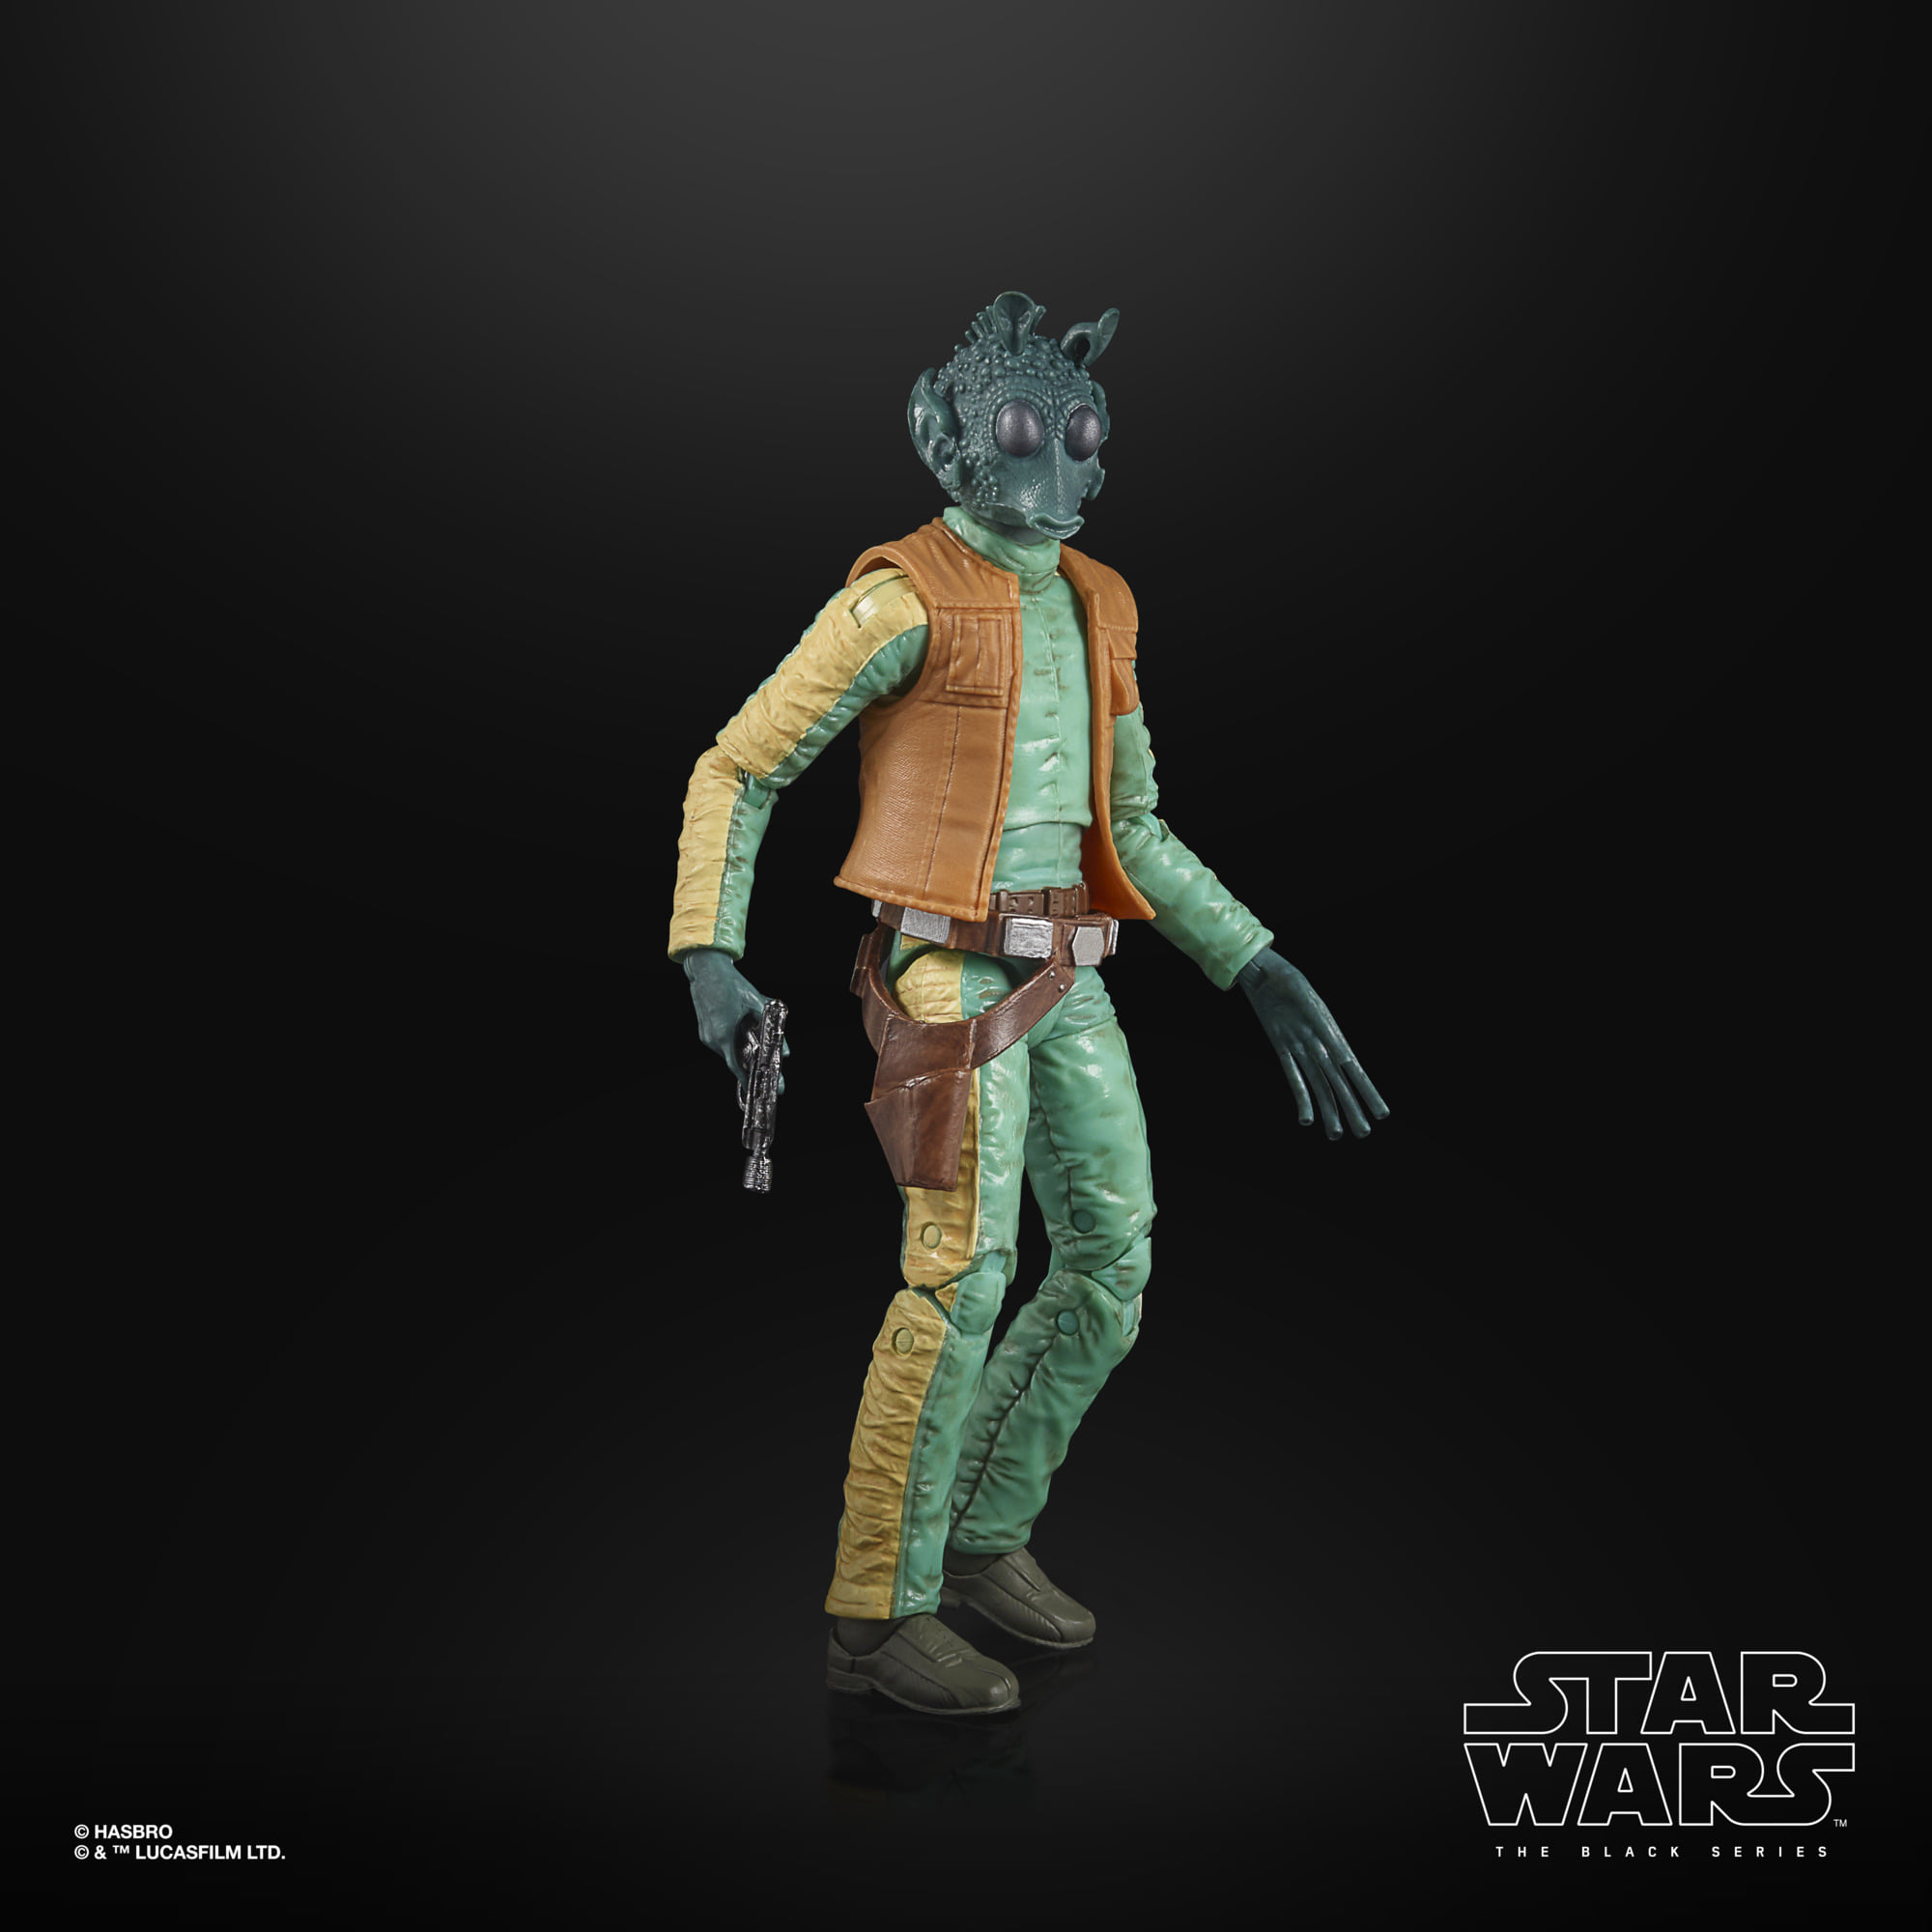 Star Wars The Black Series THE POWER OF THE FORCE - Greedo F32645L00 5010993899814